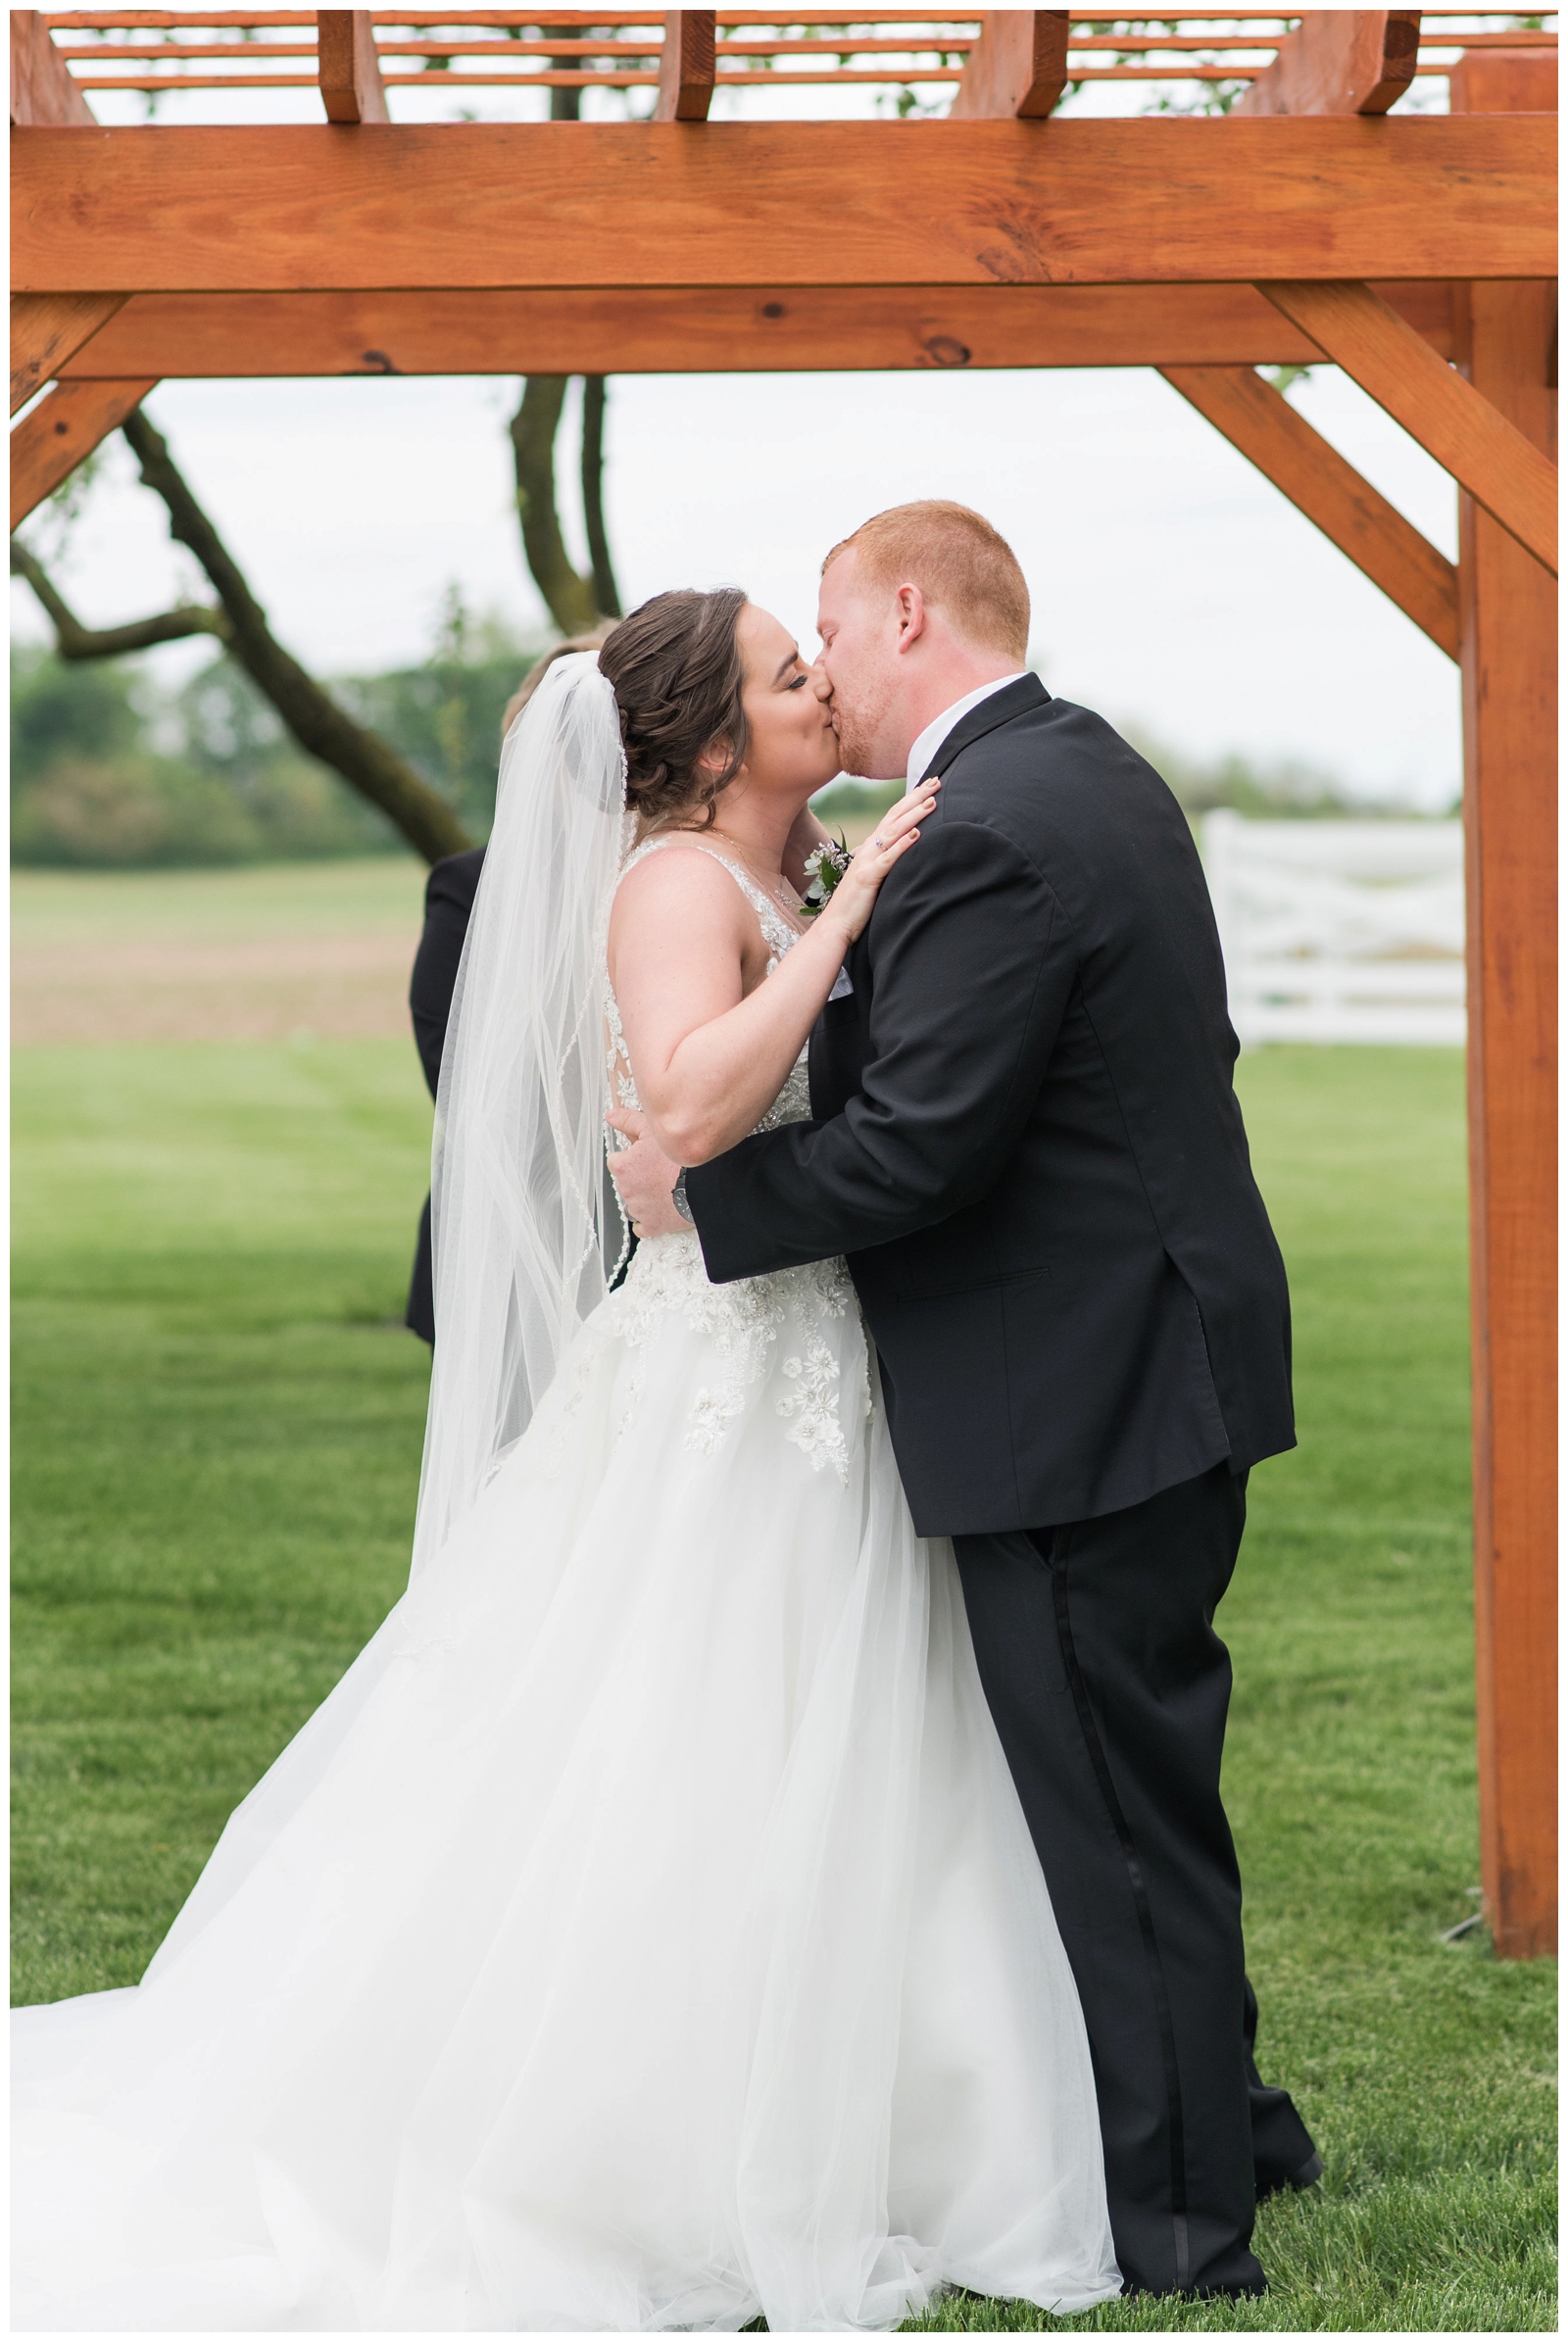 first kiss as husband and wife under wooden arbor at Pretty Prairie Farms